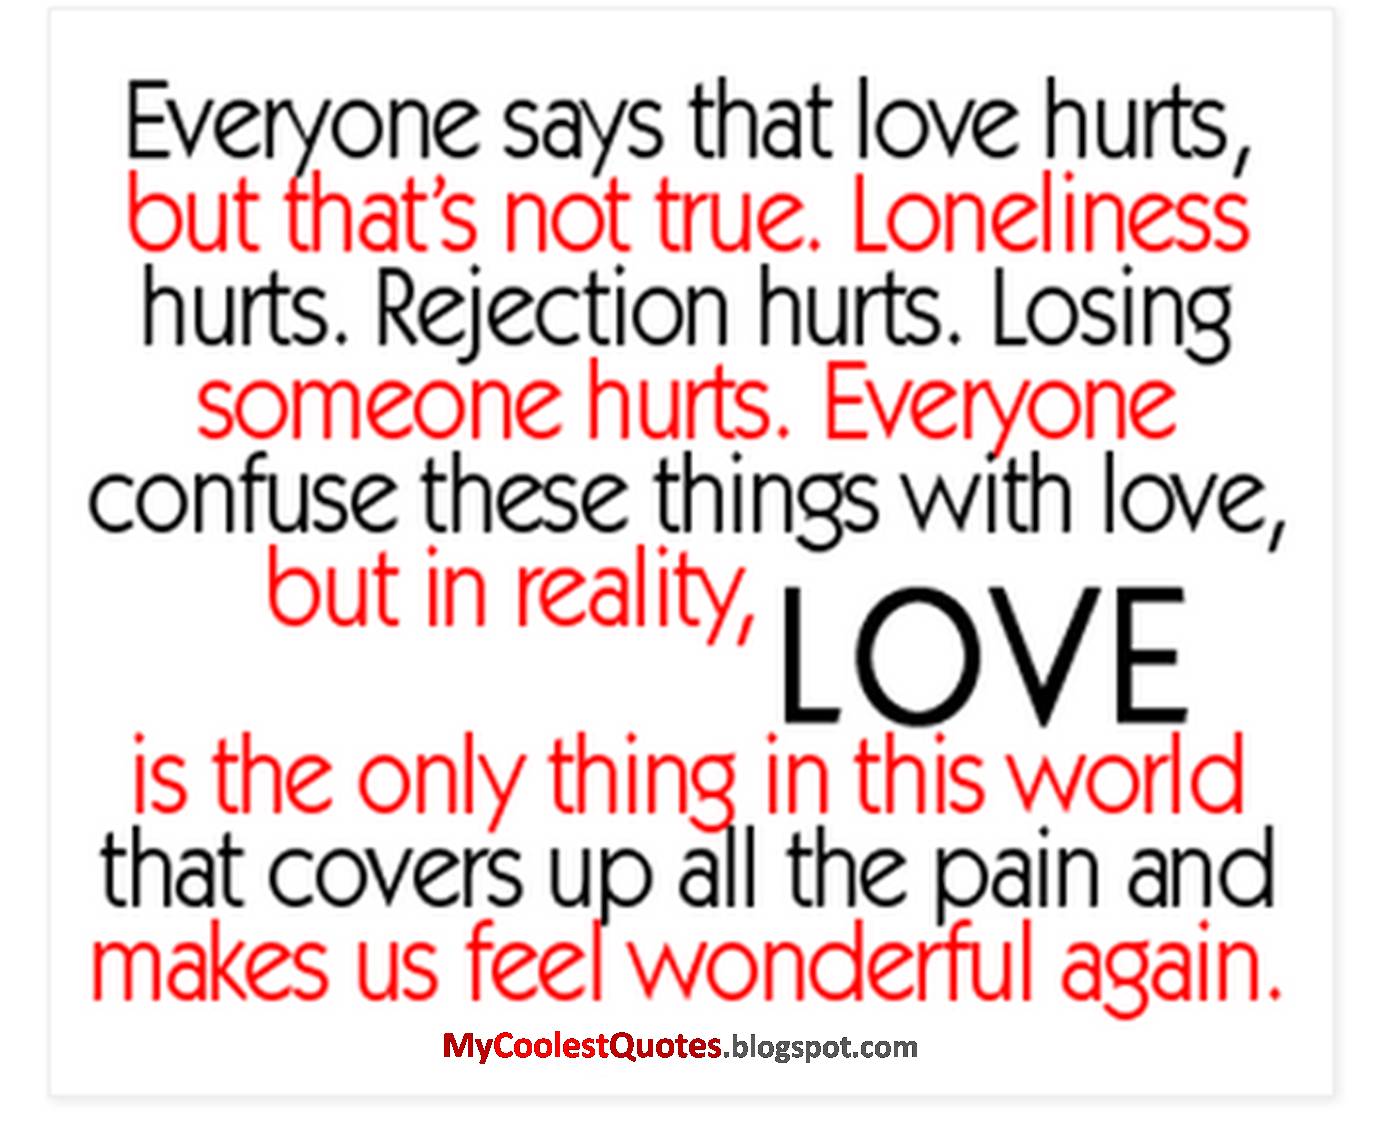 Does LOVE really HURT